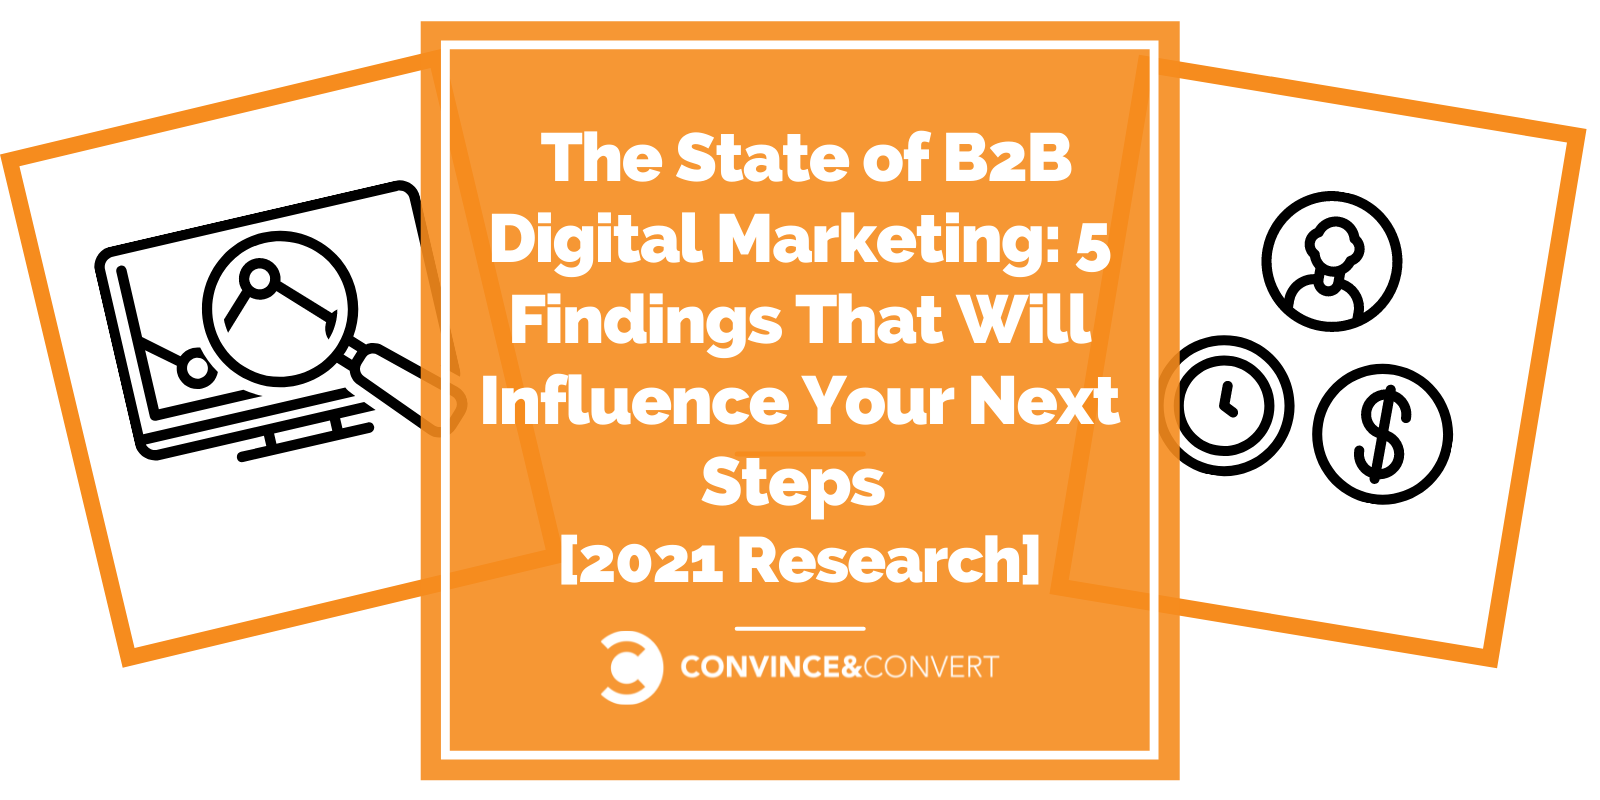 You are currently viewing The State of B2B Digital Marketing: 5 Findings That Will Influence Your Next Steps [2021 Research]